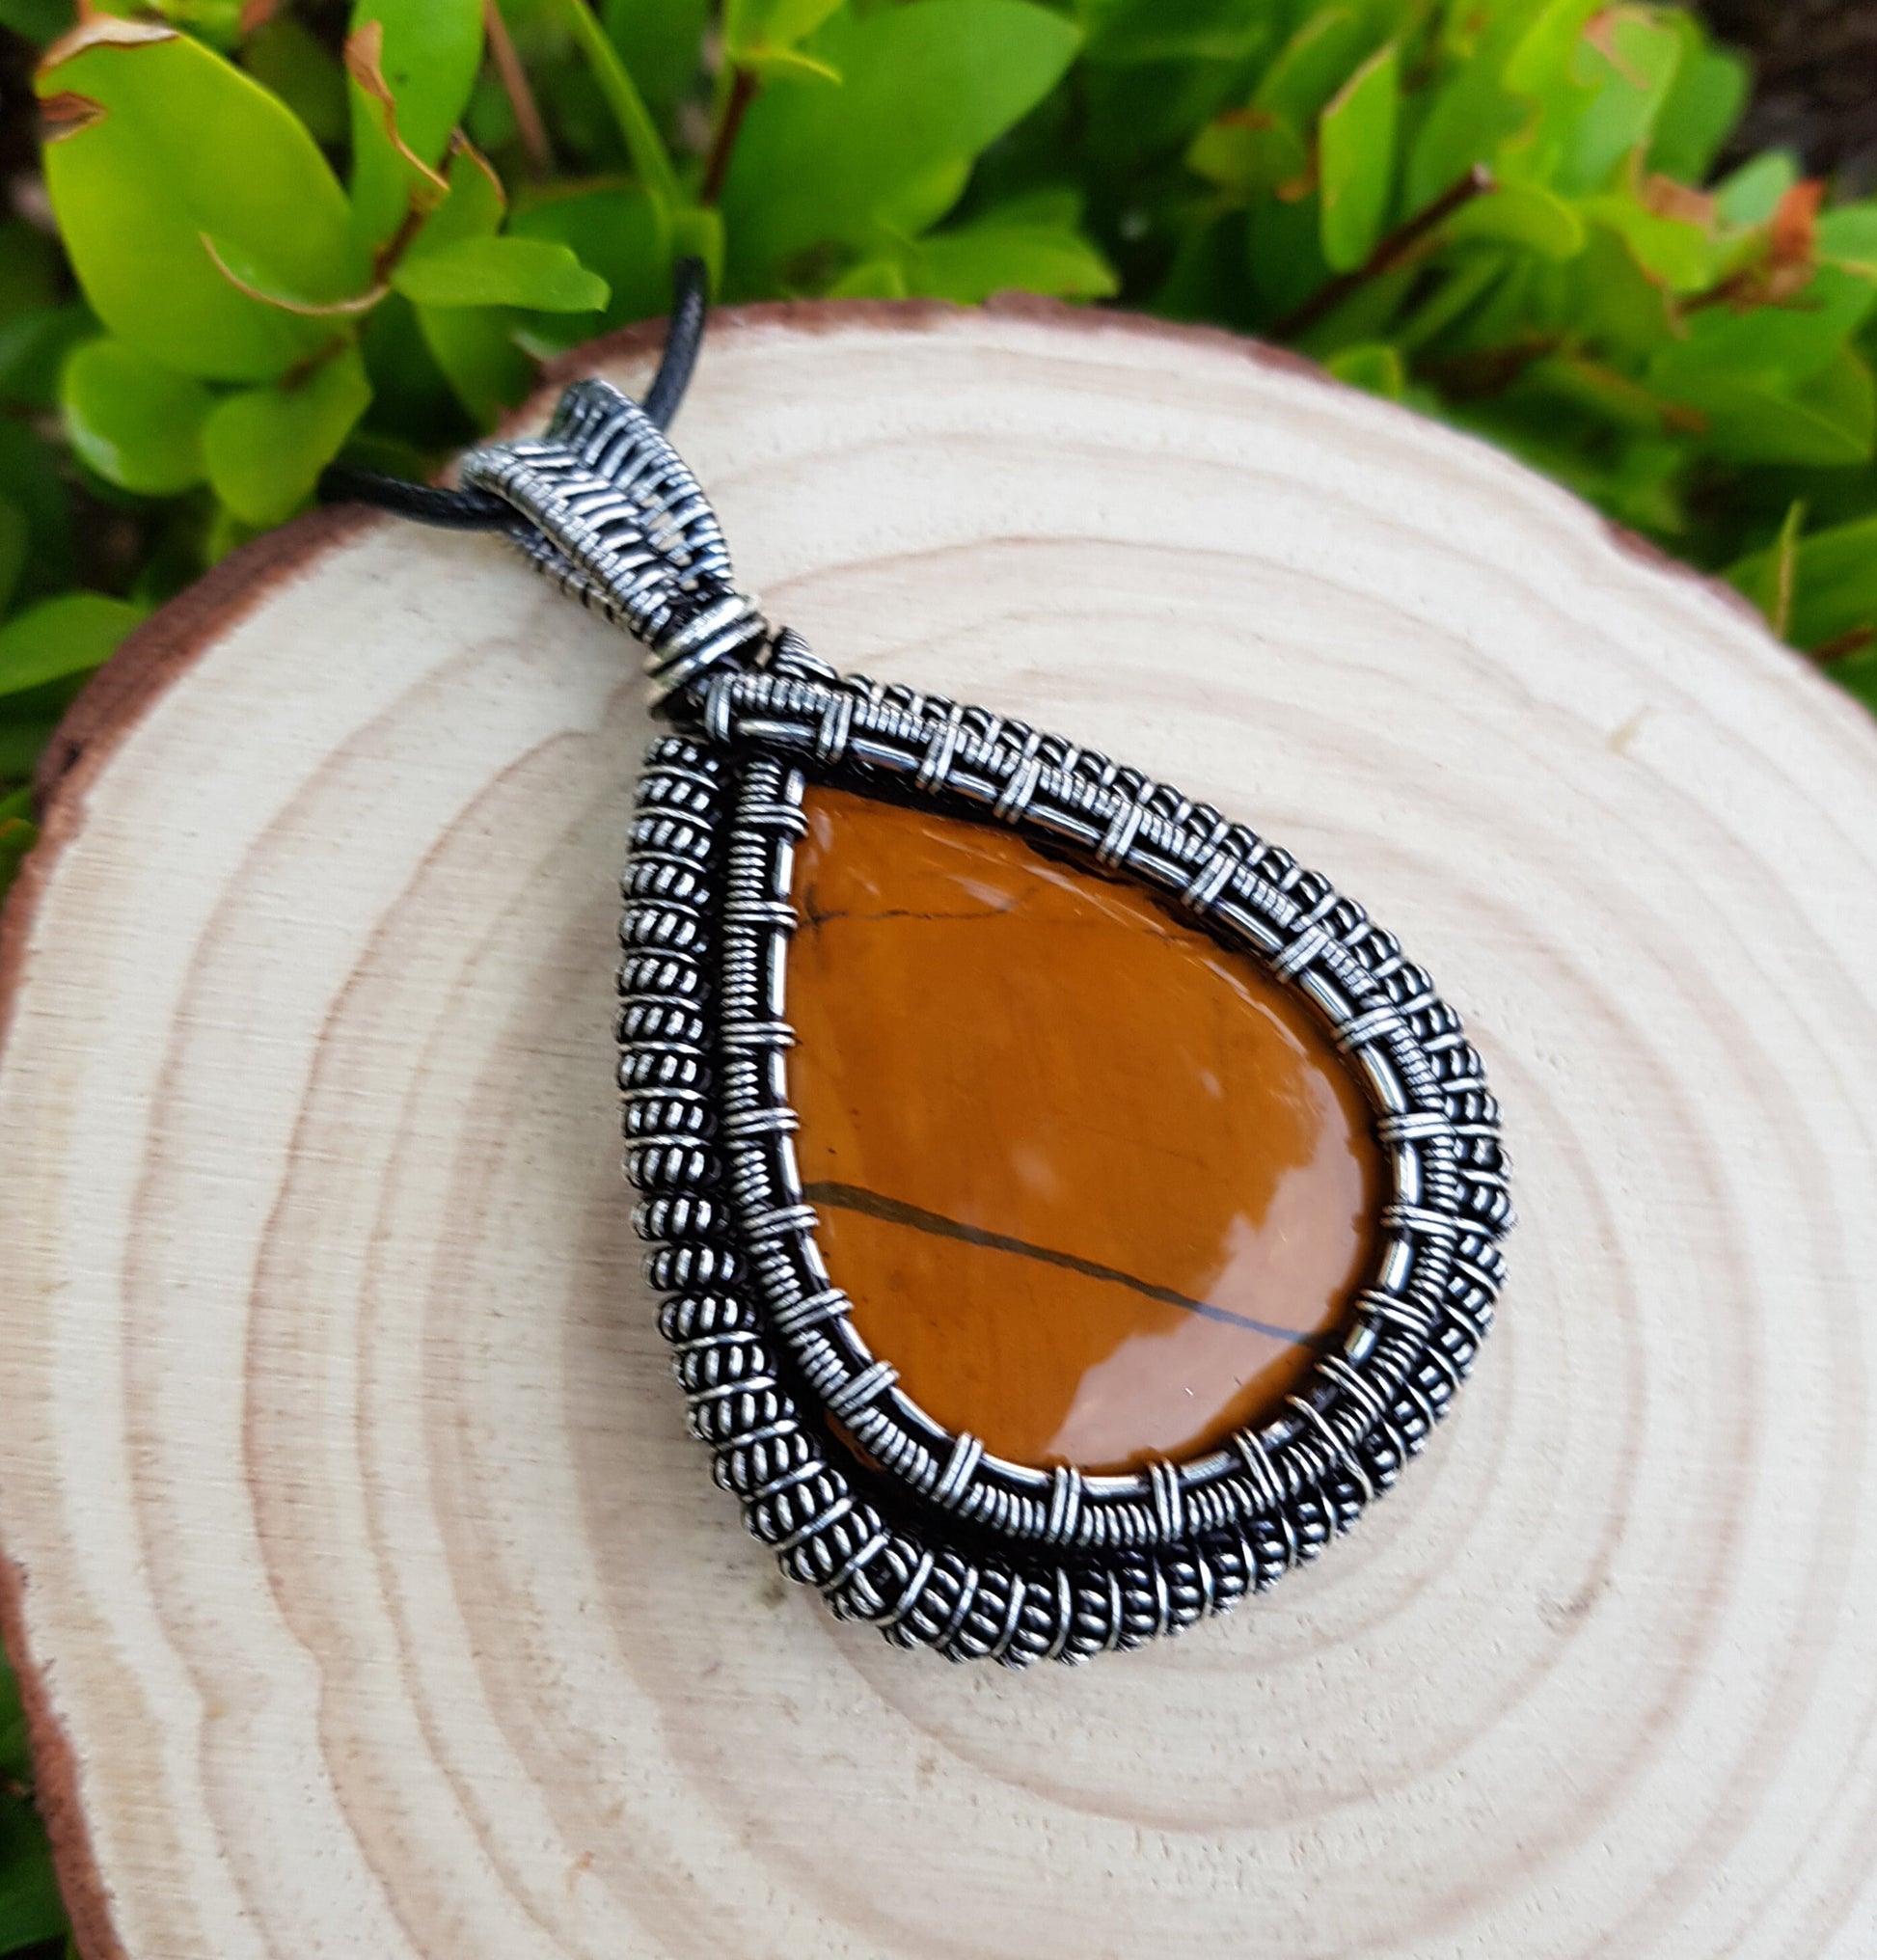 Tiger's Eye Wire Wrapped Pendant In Sterling Silver Statement Pendant Boho Necklace One Of A Kind Gift GypsyJewelry